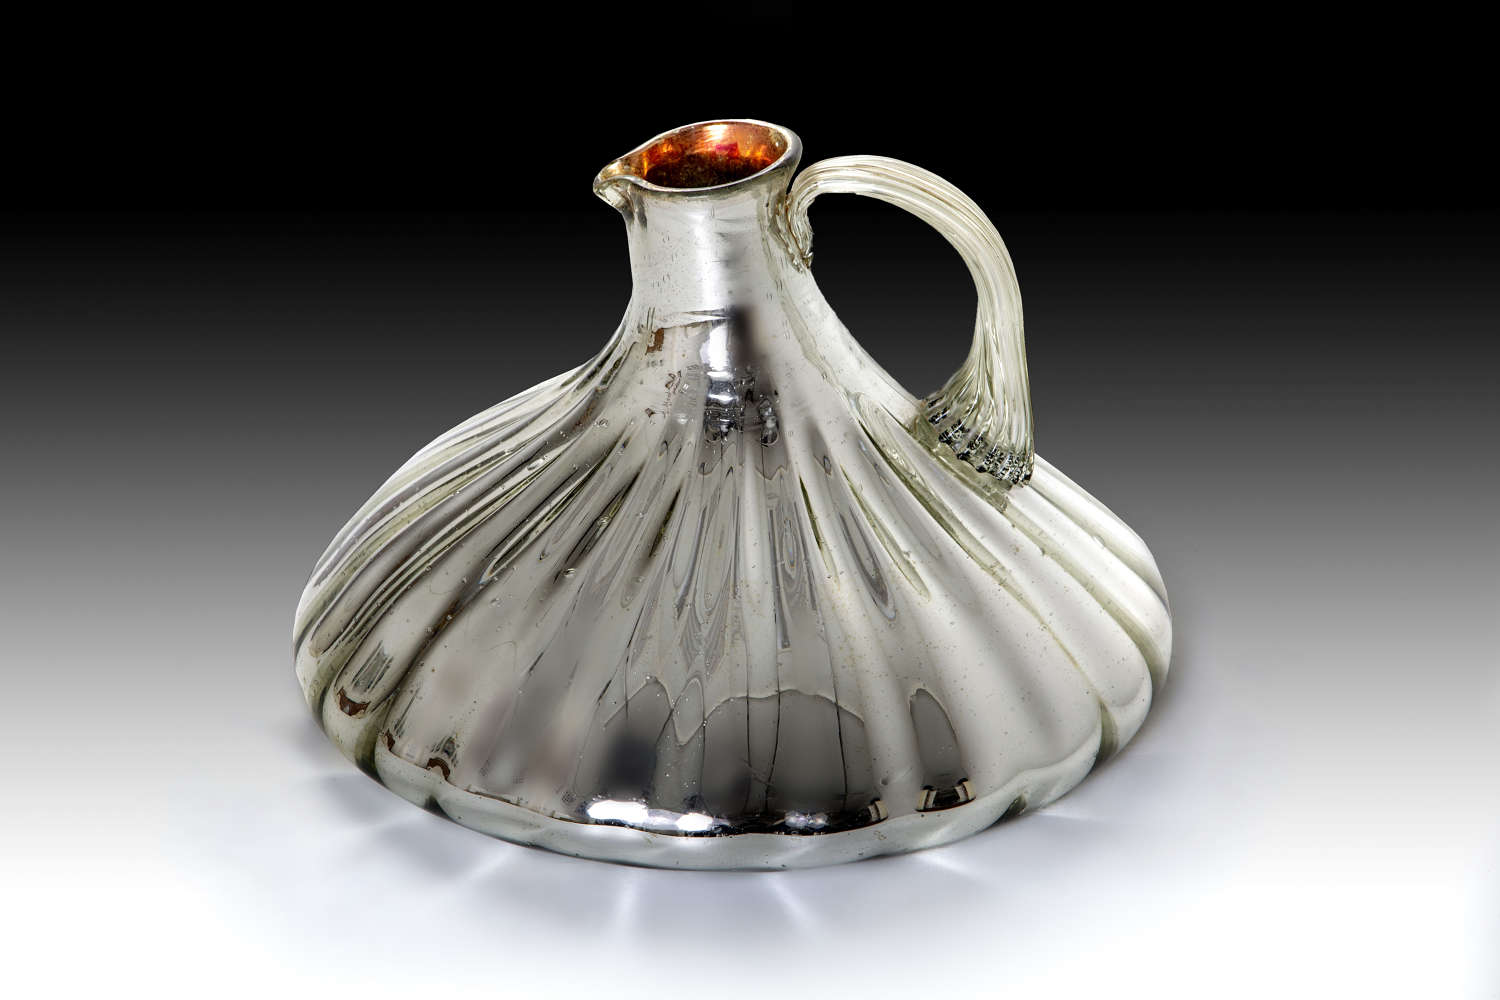 A rare early 20th century glass carafe